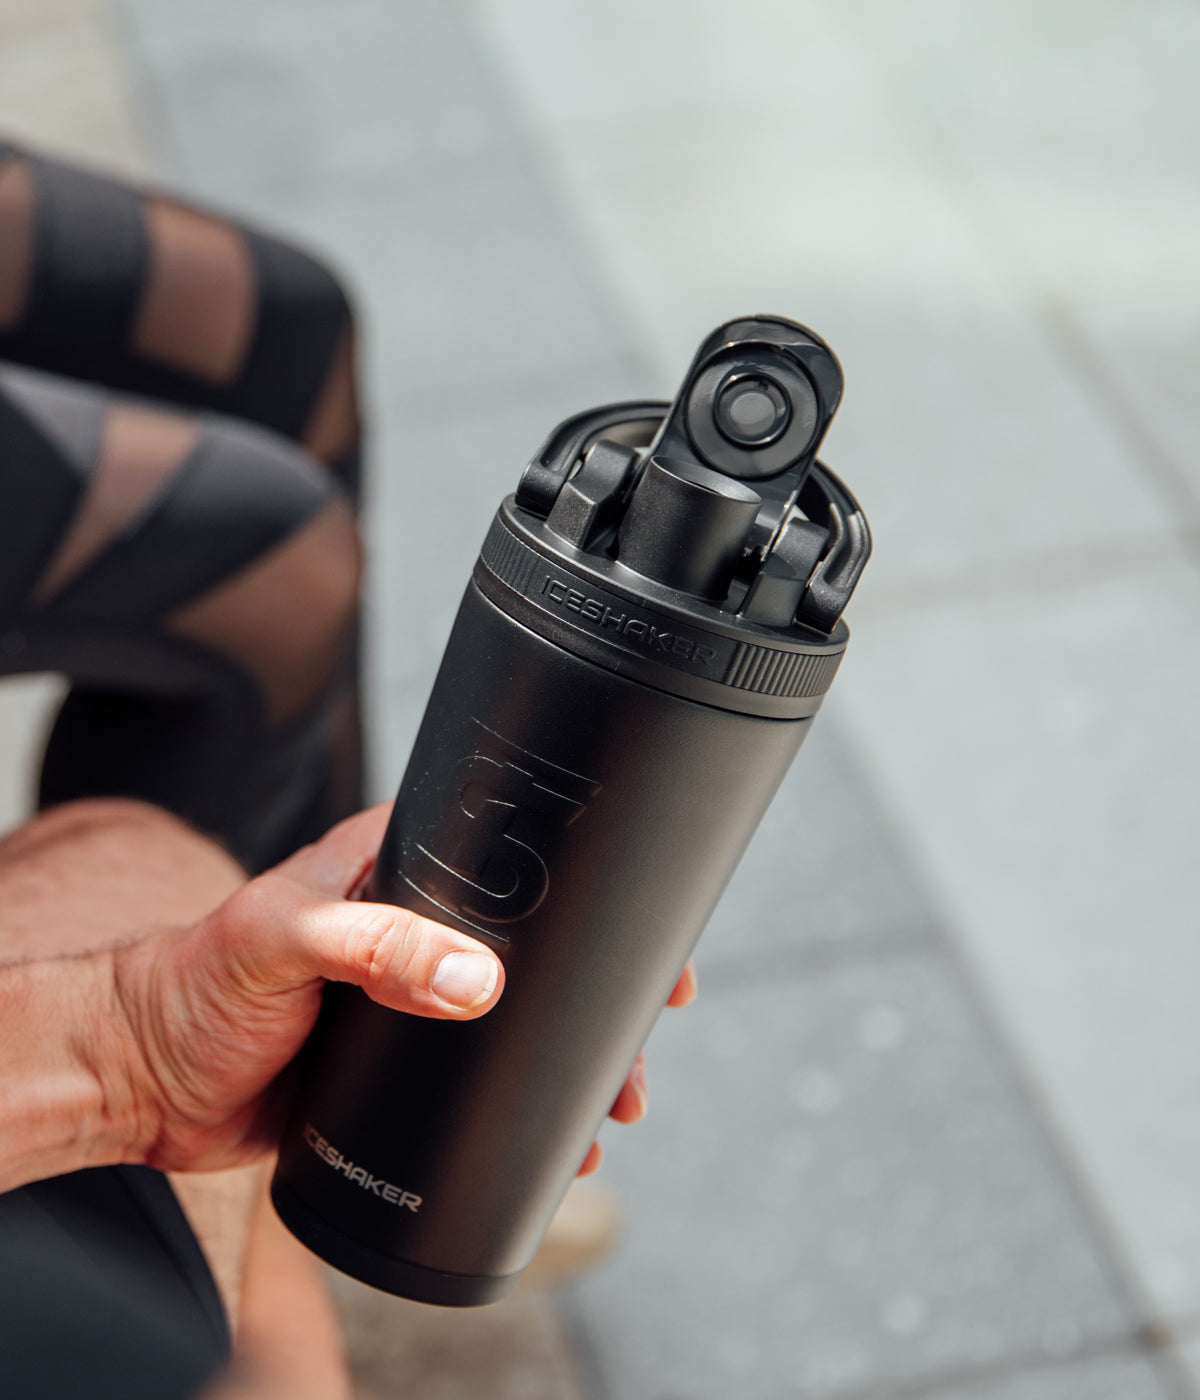 This image shows a close up view of the Black 26oz Ice Shaker. The flip lid top is open and is being held up by a hand.